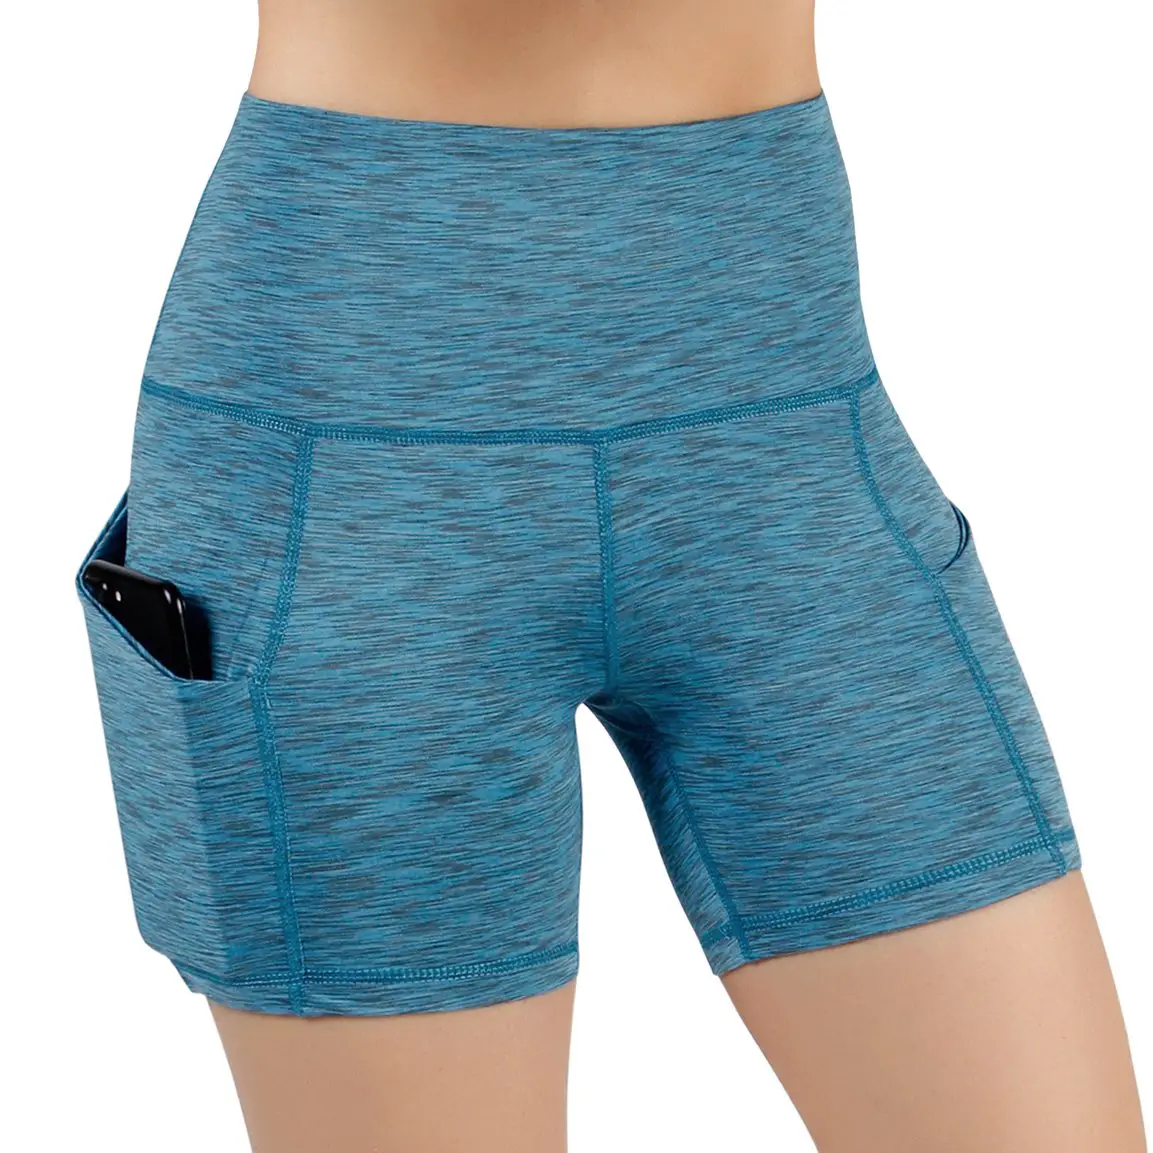 10 Best Yoga Shorts Reviewed in 2022 | TheGearHunt